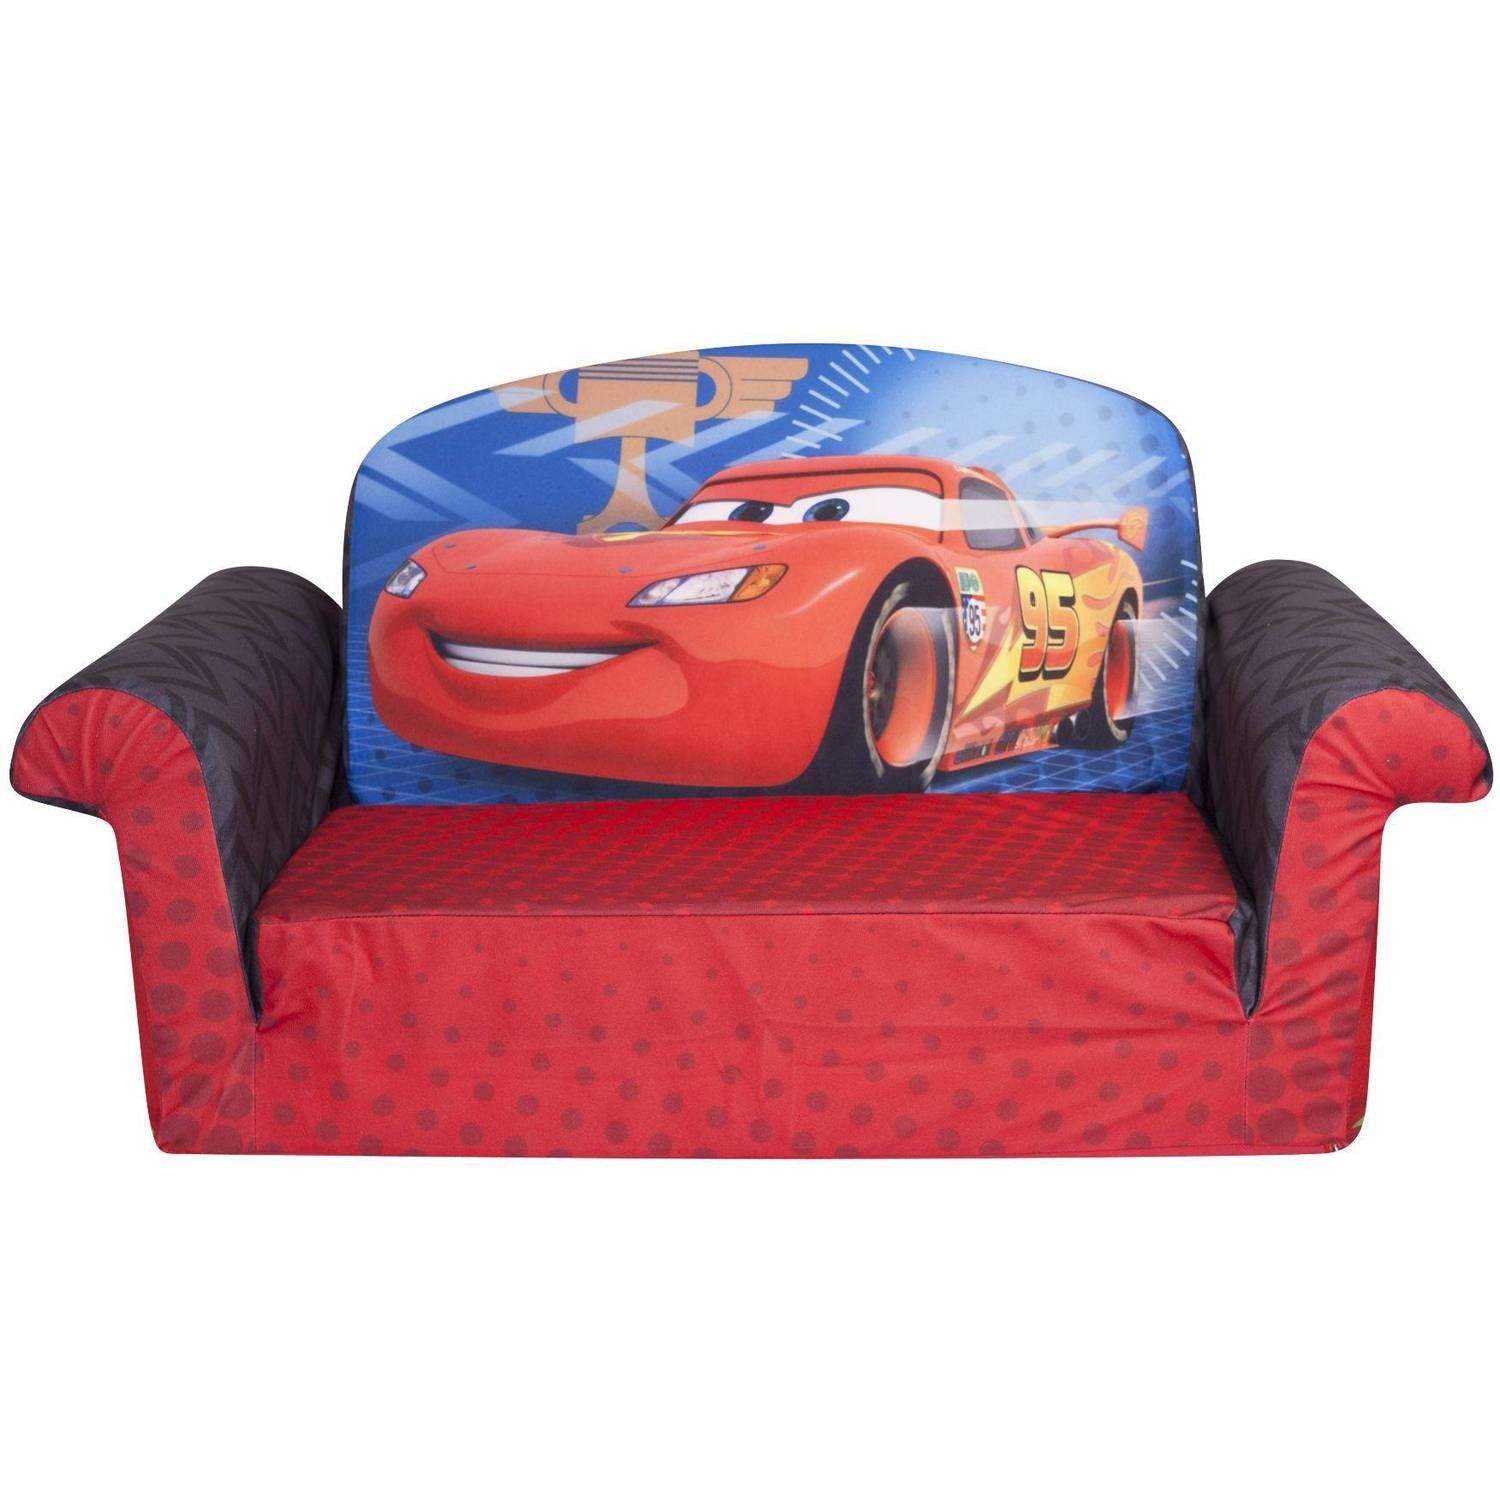 Marshmallow 2 In 1 Flip Open Sofa, Disney Cars 2 – Walmart With Sofa Beds For Baby (View 9 of 15)